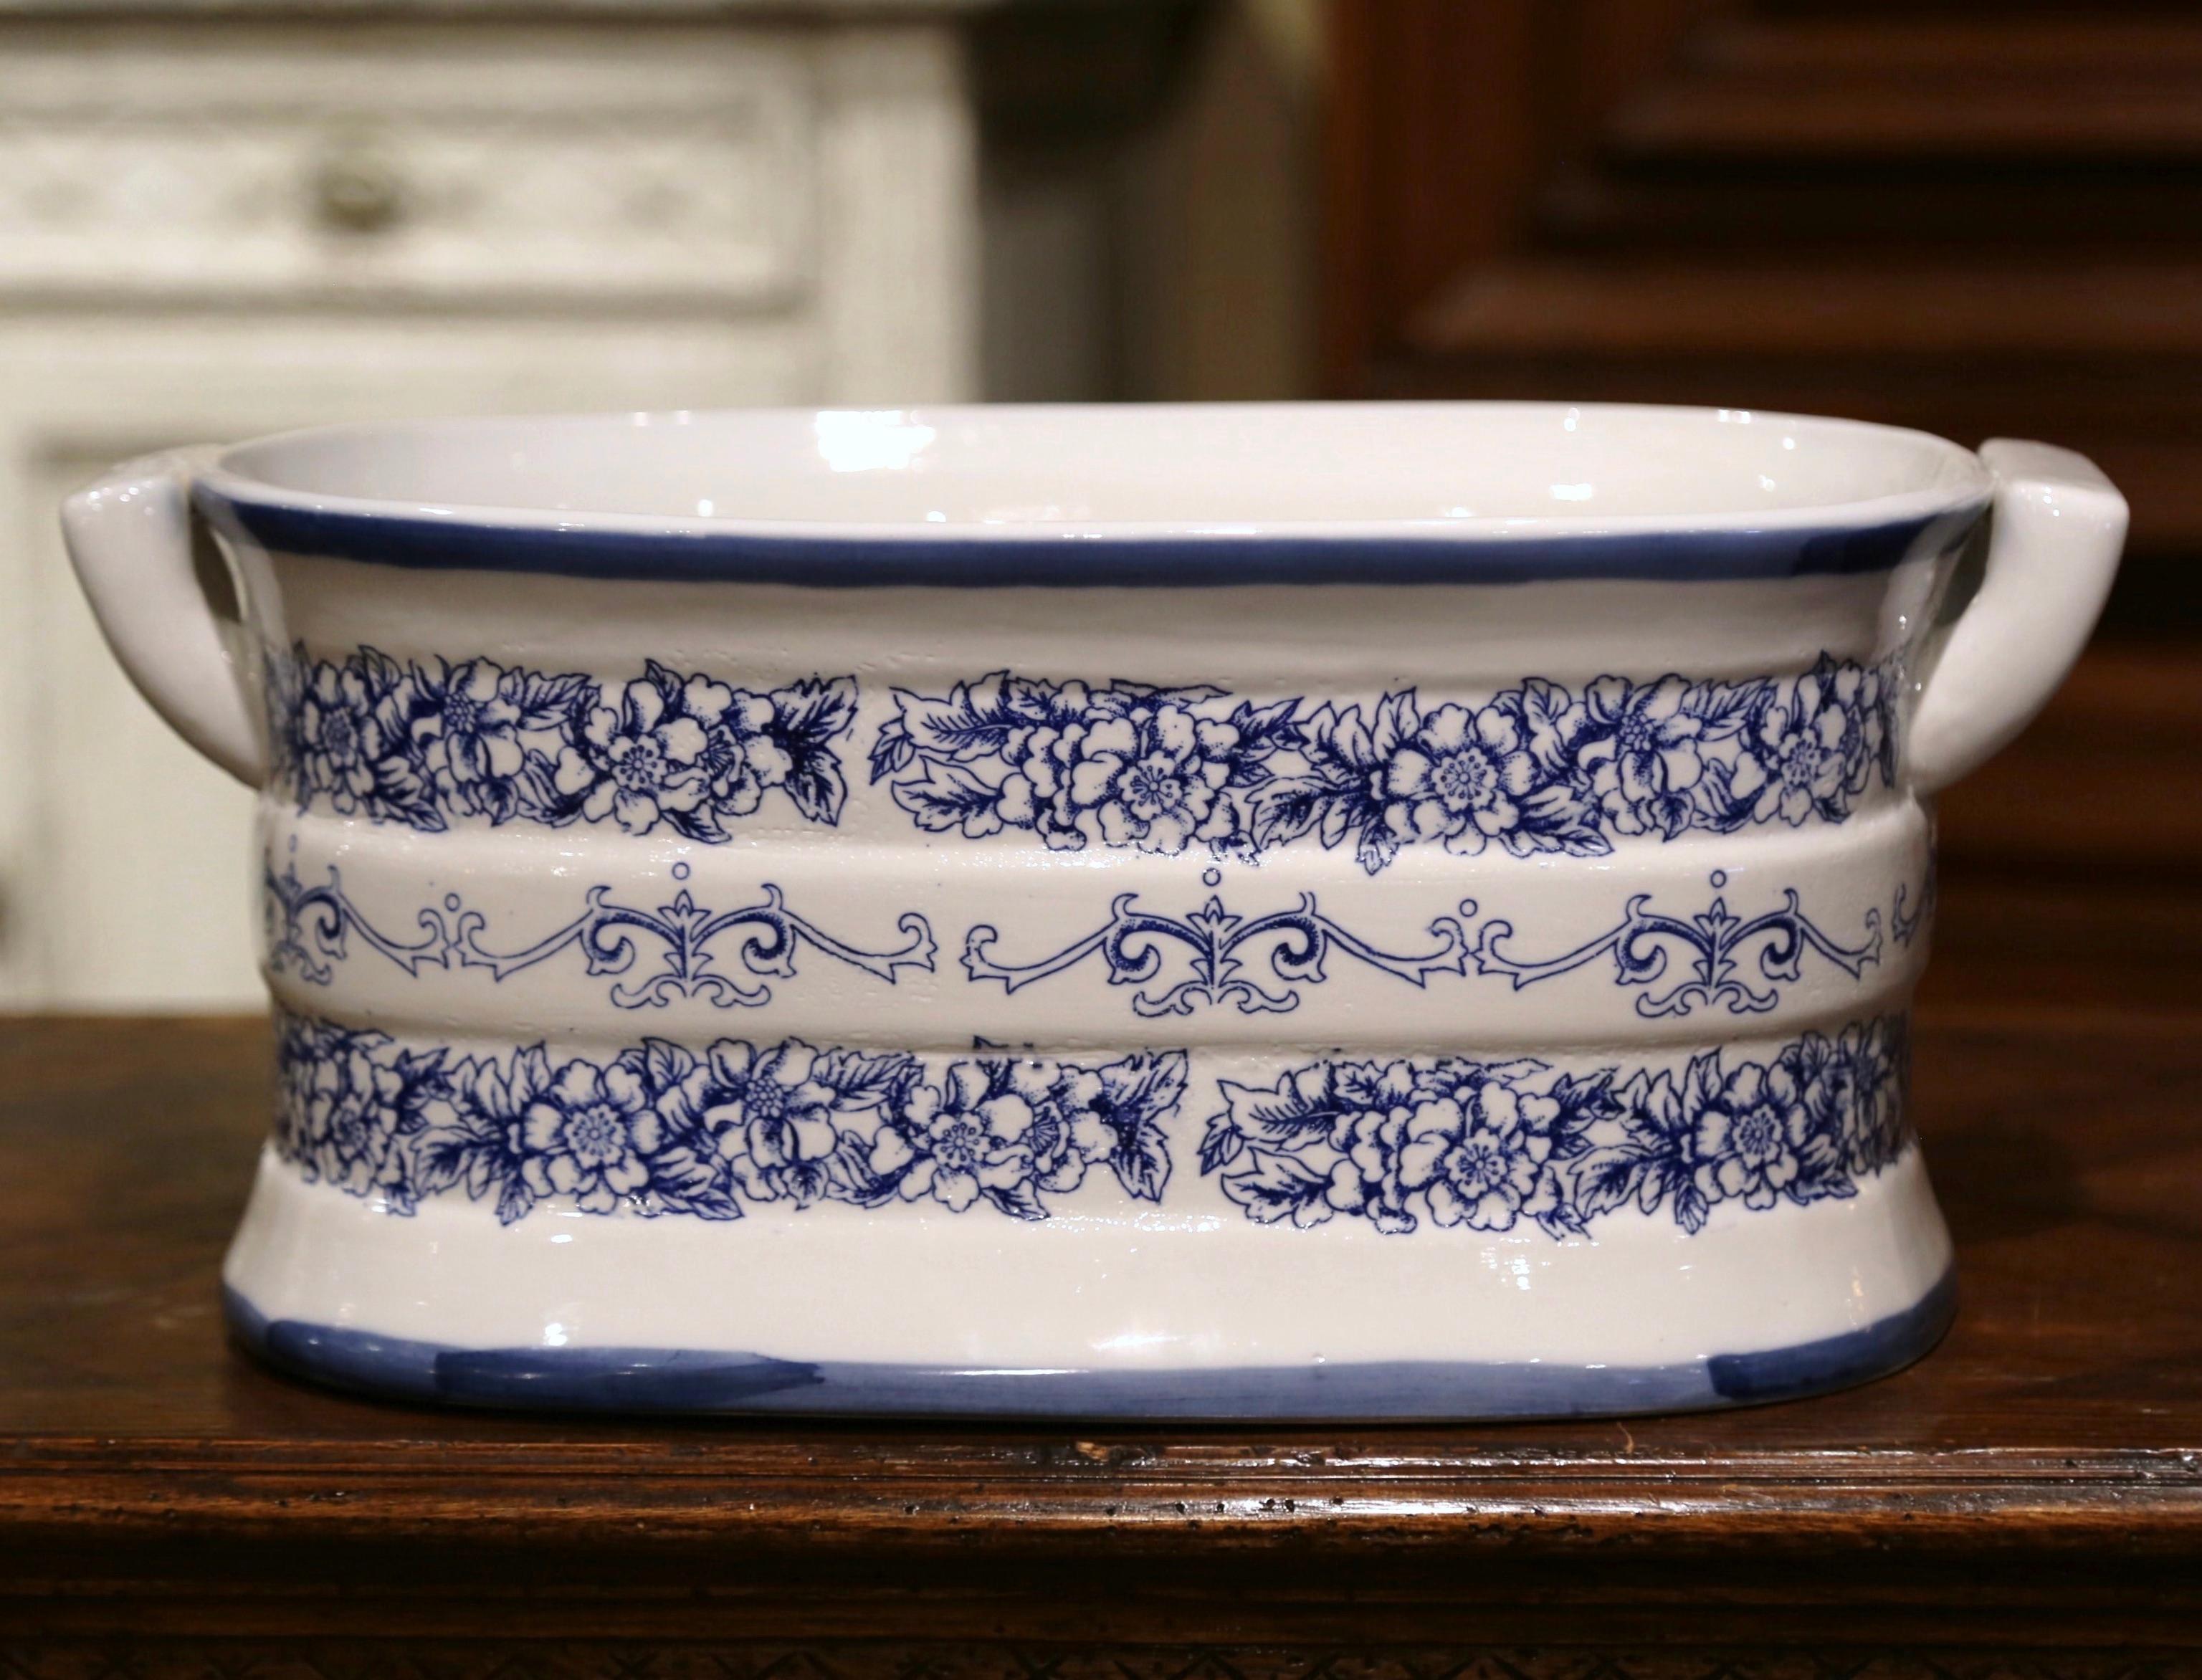 Crafted in Italy circa 1980 and oval in shape with bowed sides, the vintage porcelain basin is dressed with two side handles; it is decorated with hand painted floral motifs in the Delft blue and white palette. This elegant and colorful jardinière